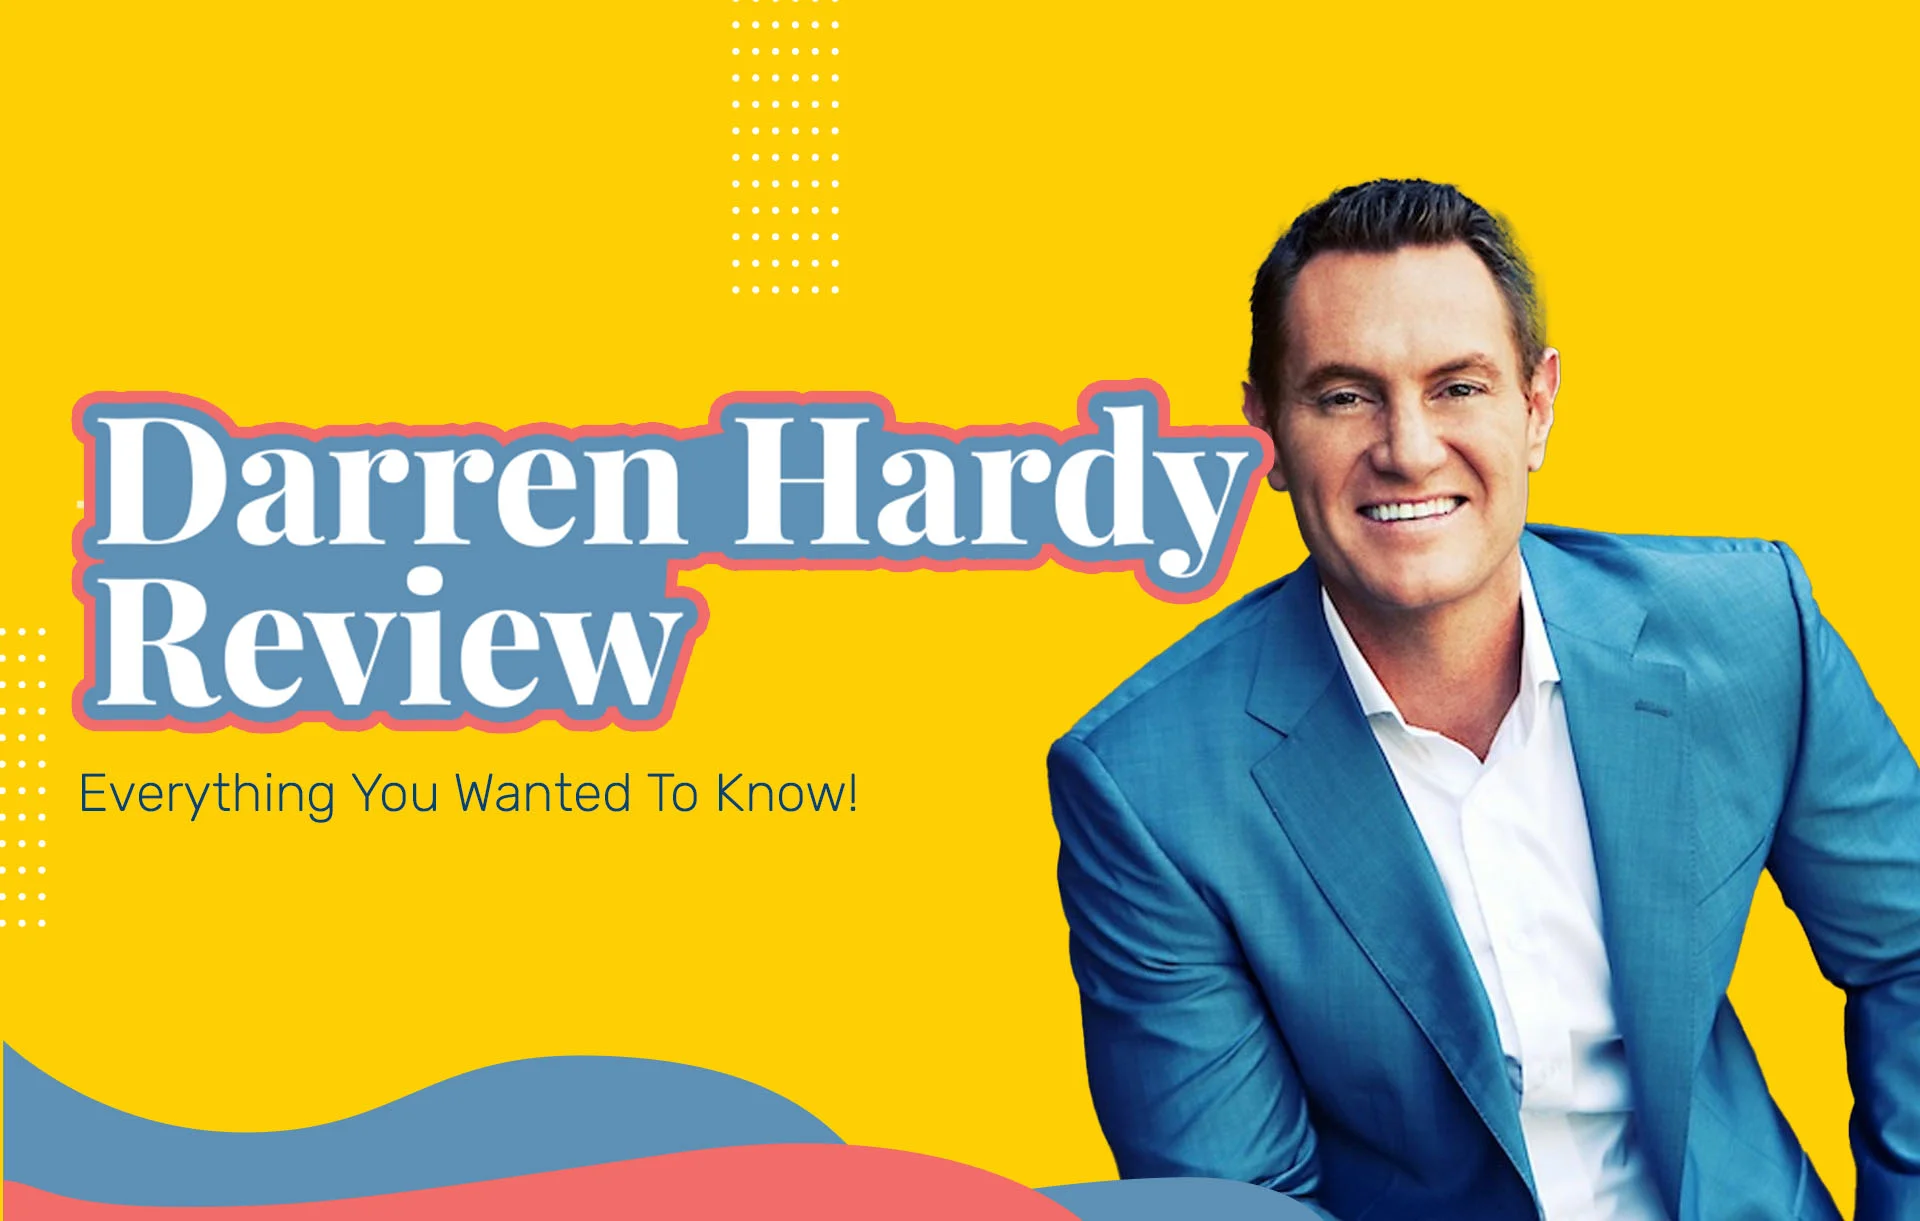 Darren Hardy Reviews: Everything You Wanted To Know!